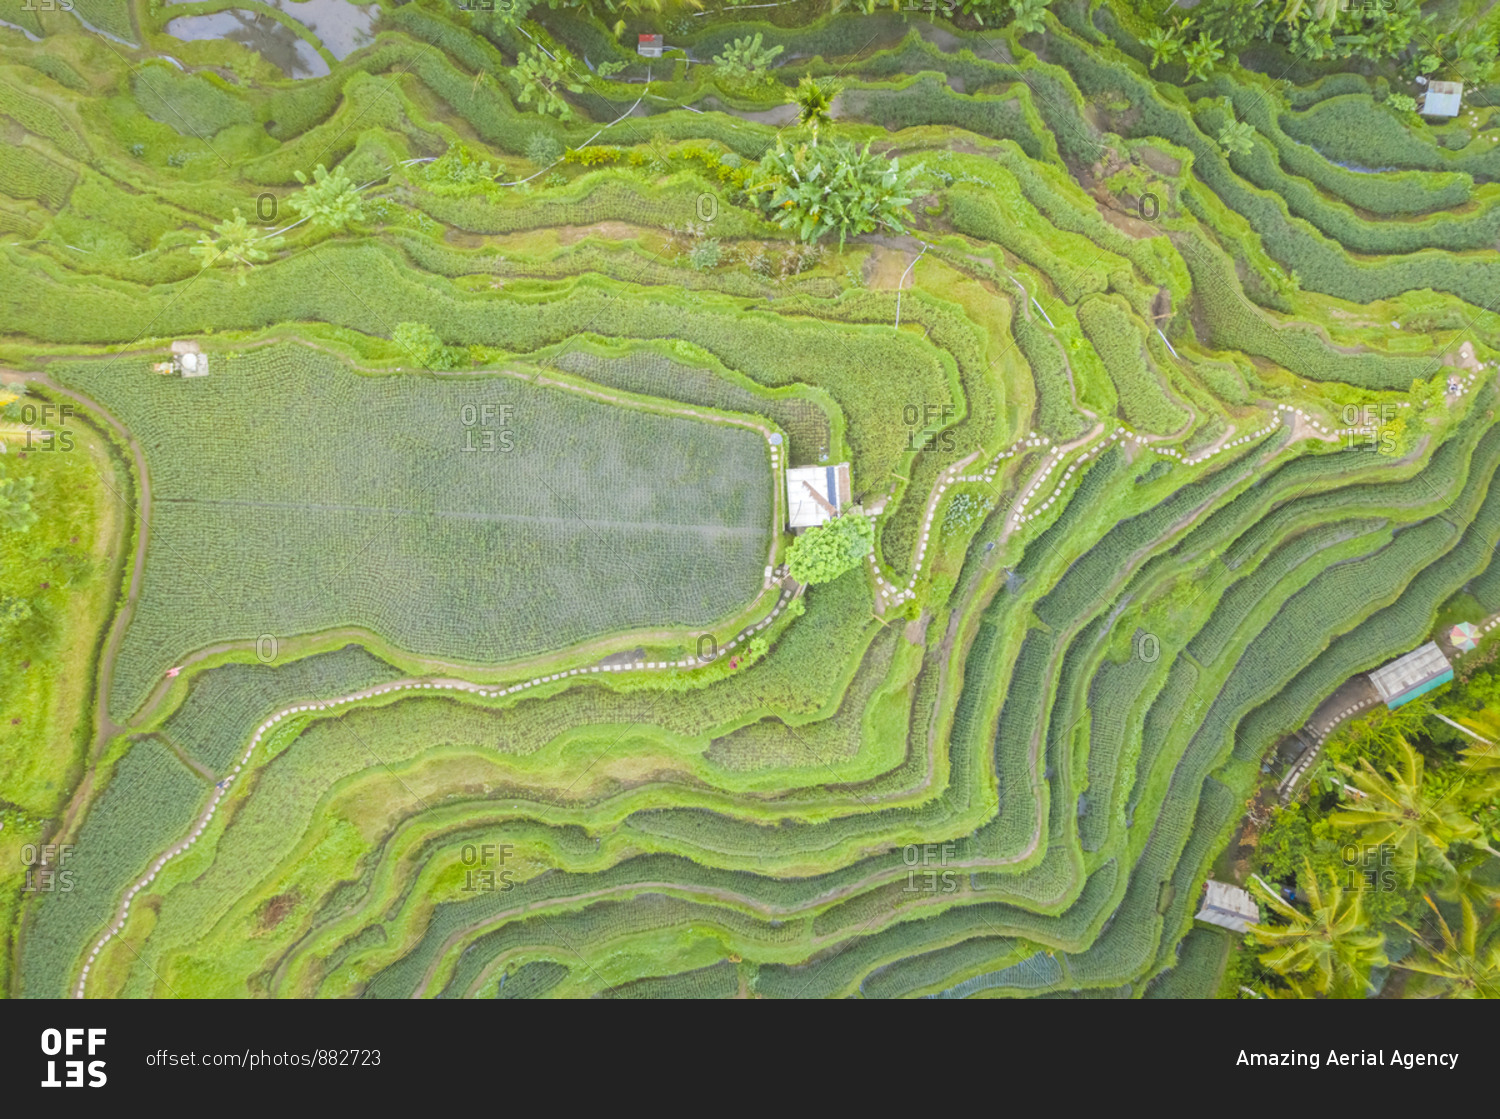 Aerial view over Tegallalang Rice Terrace touristic attraction, Indonesia.